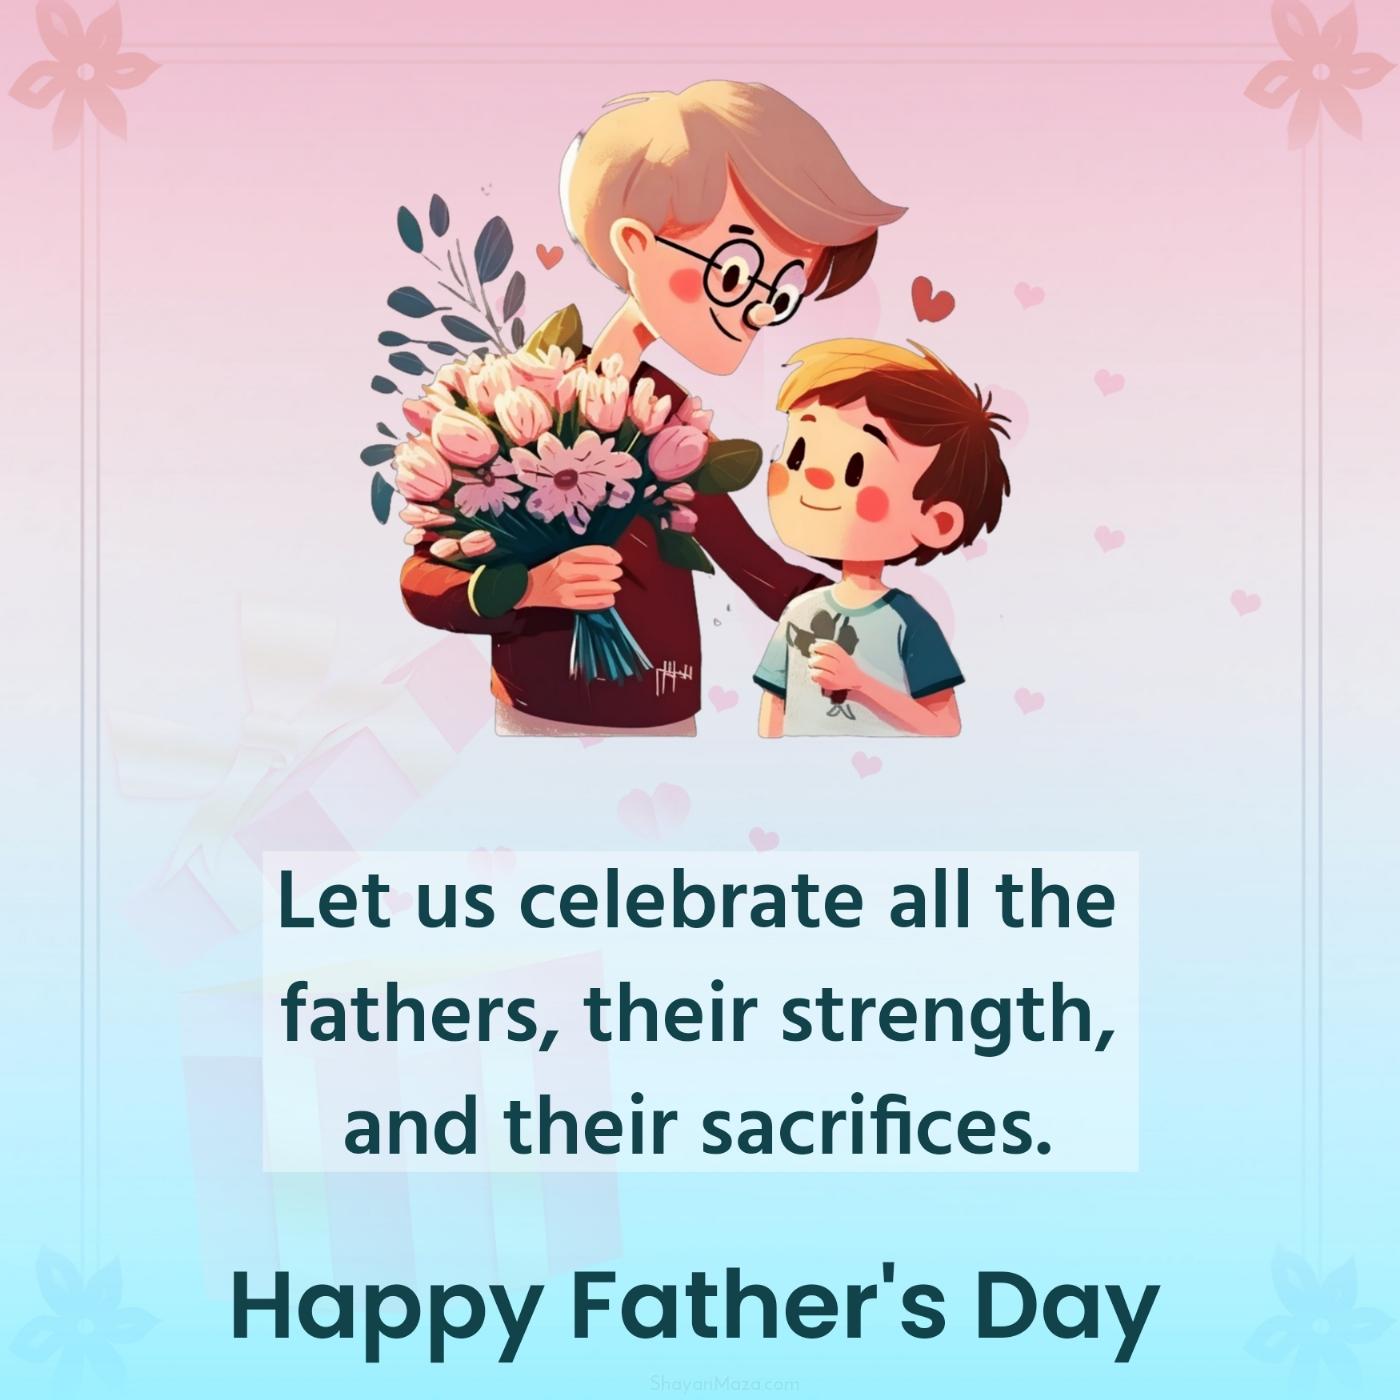 Let us celebrate all the fathers their strength